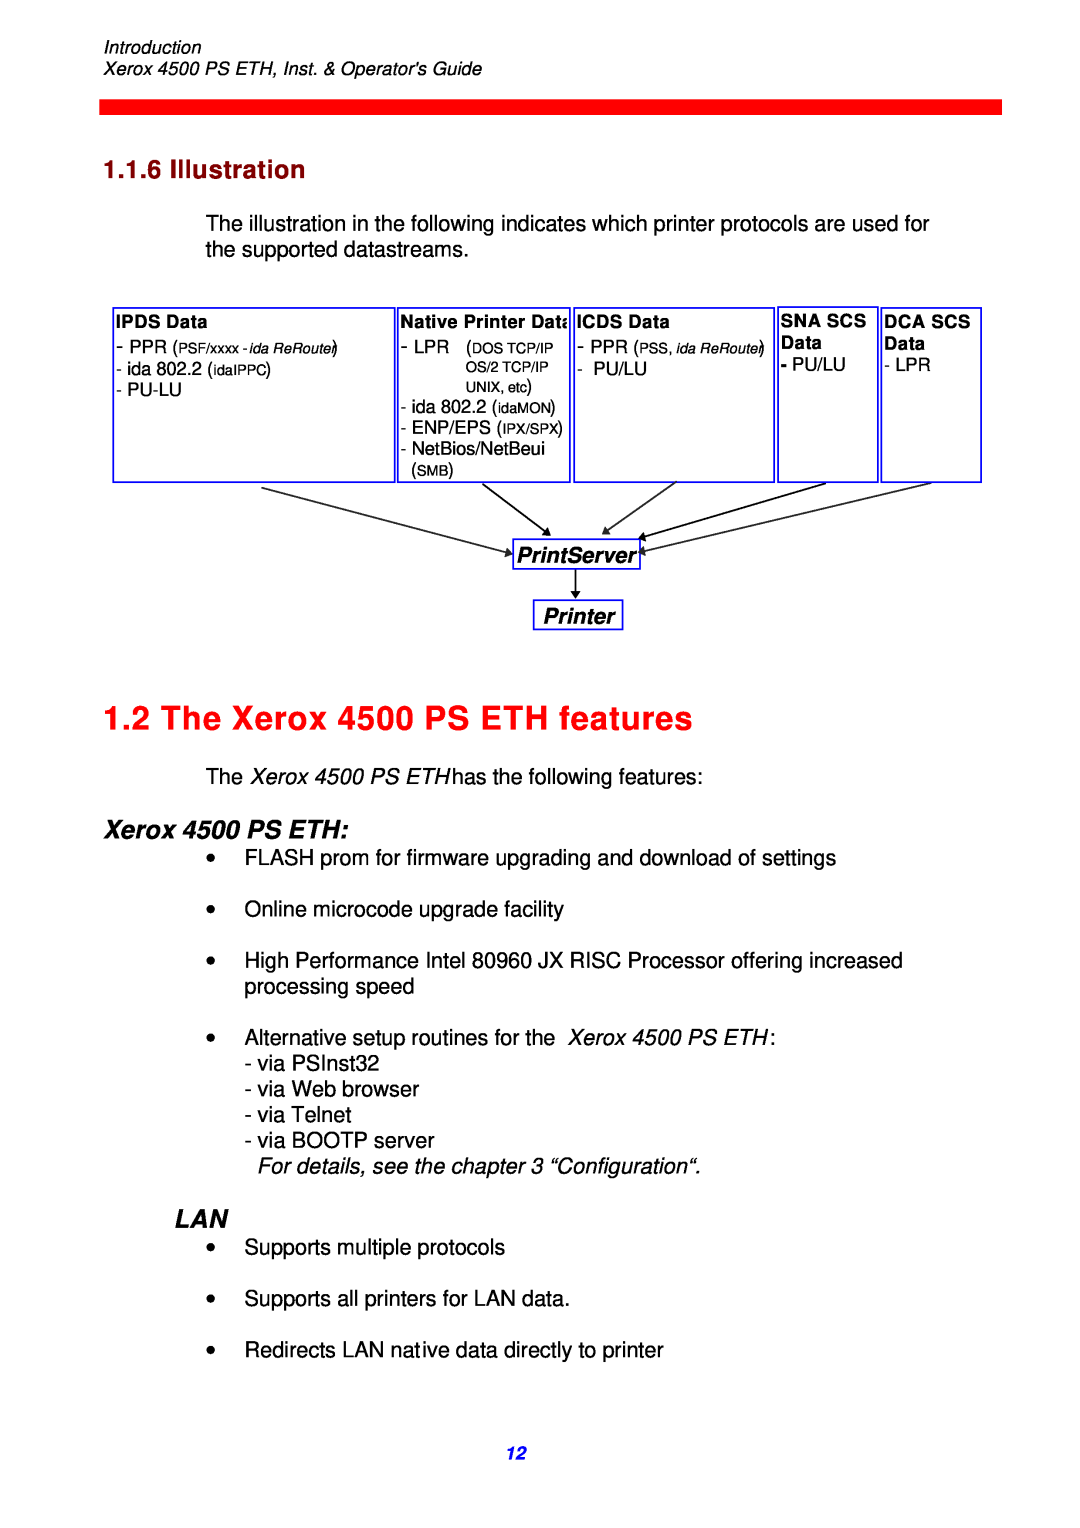 Xerox 4500 ps eth The Xerox 4500 PS ETH features, Illustration, PrintServer Printer, For details, see the “Configuration“ 